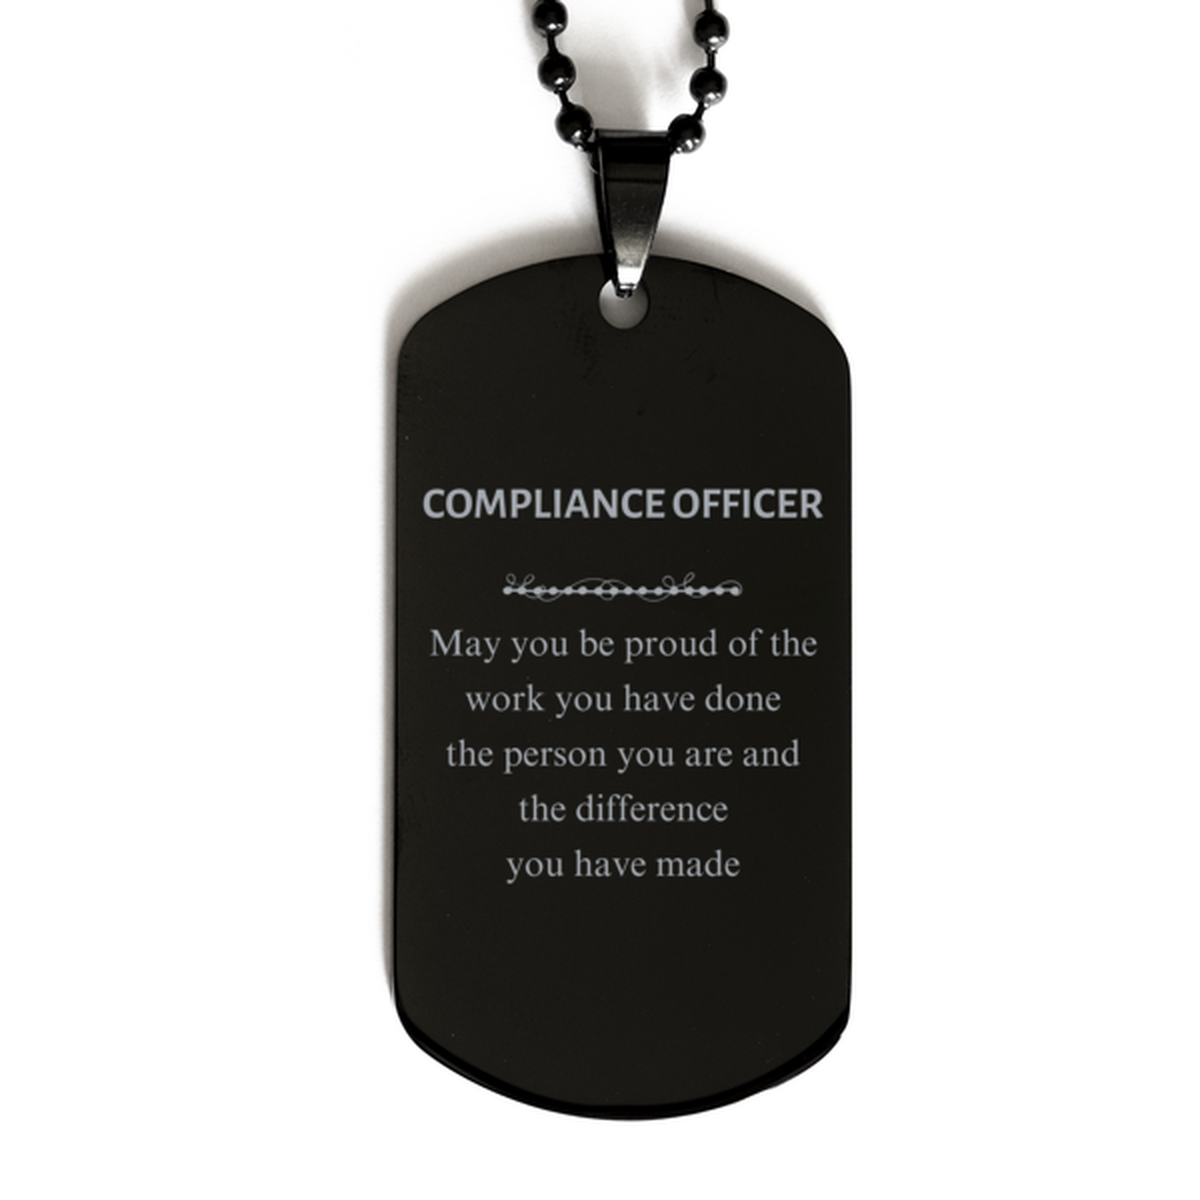 Compliance Officer May you be proud of the work you have done, Retirement Compliance Officer Black Dog Tag for Colleague Appreciation Gifts Amazing for Compliance Officer